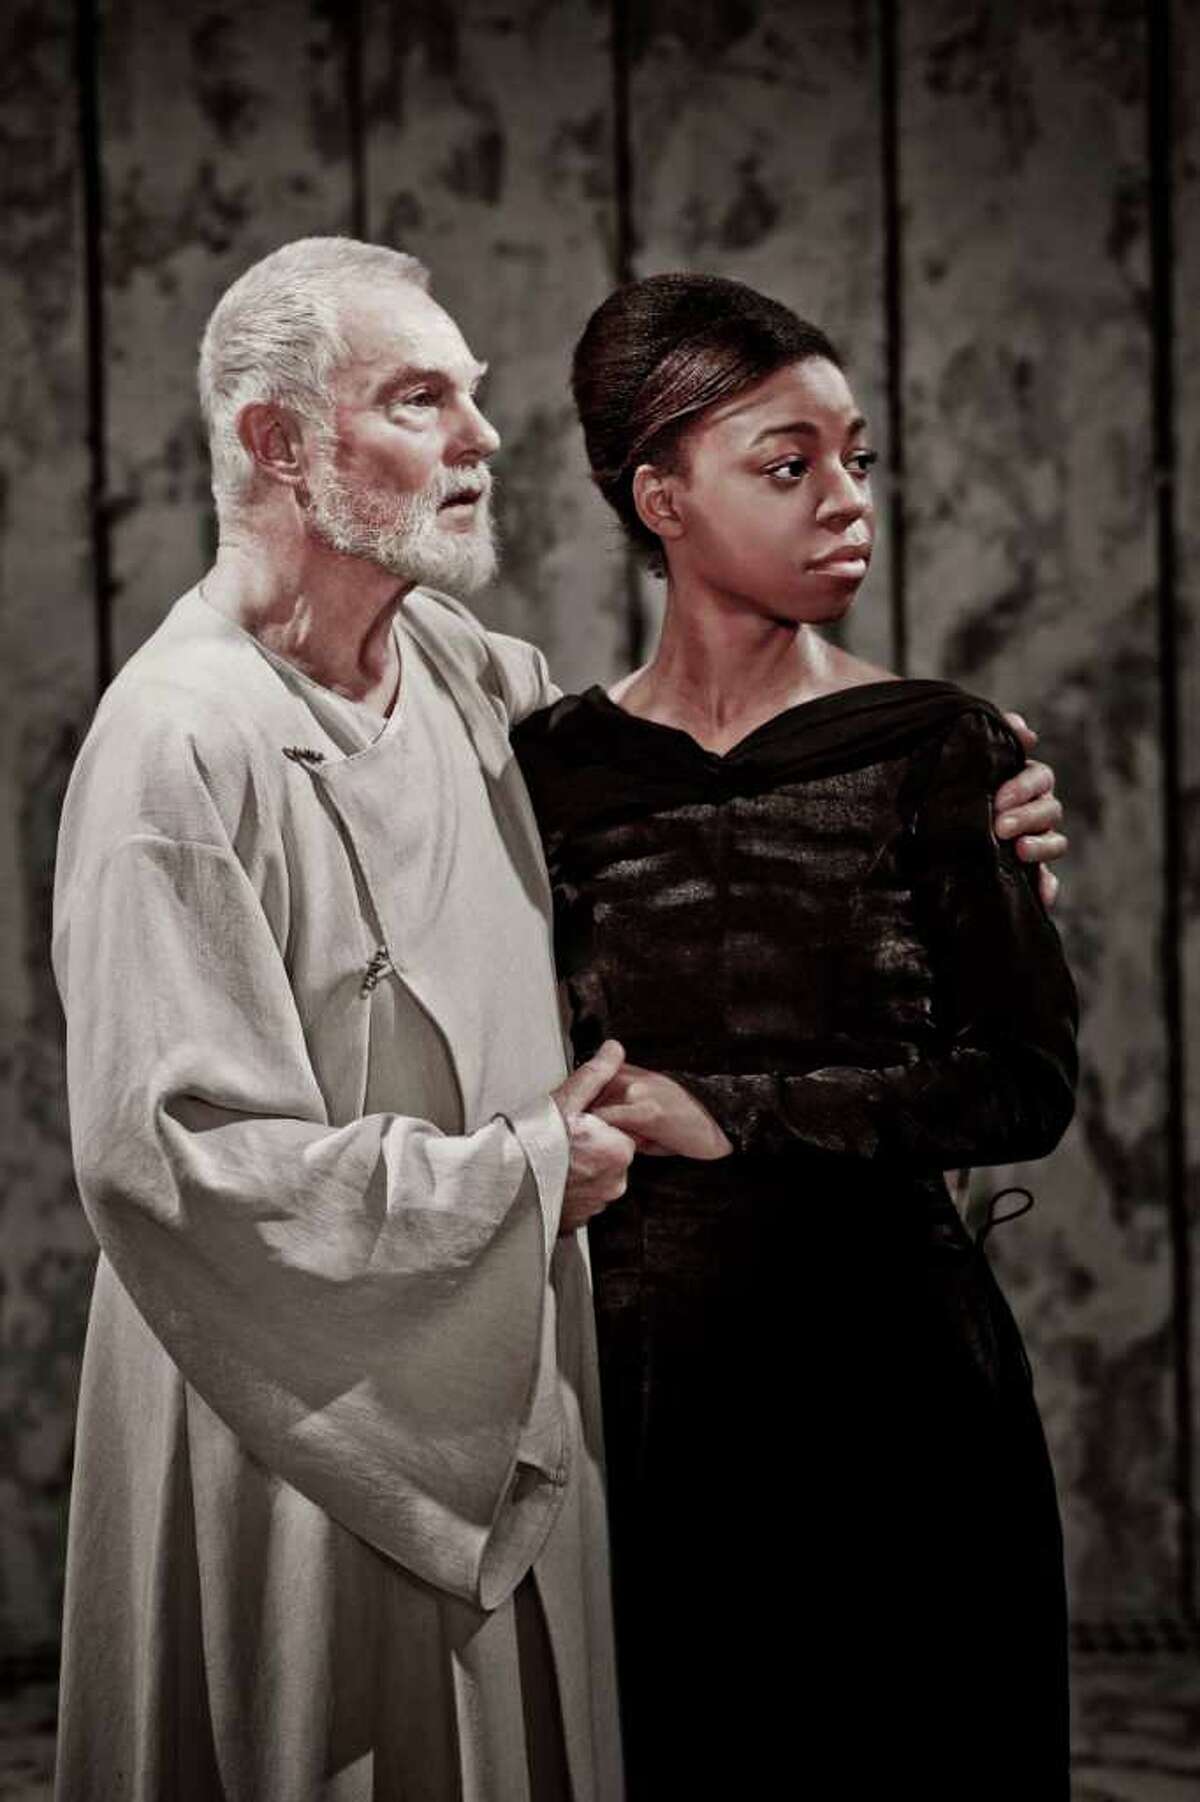 Derek Jacobi and Pippa Bennett in a scene from the Donmar Warehouse production of "King Lear" that will be transmitted from London to Fairfield University's Quick Center on Thursday Feb. 3, with an encore on Friday Feb. 11.